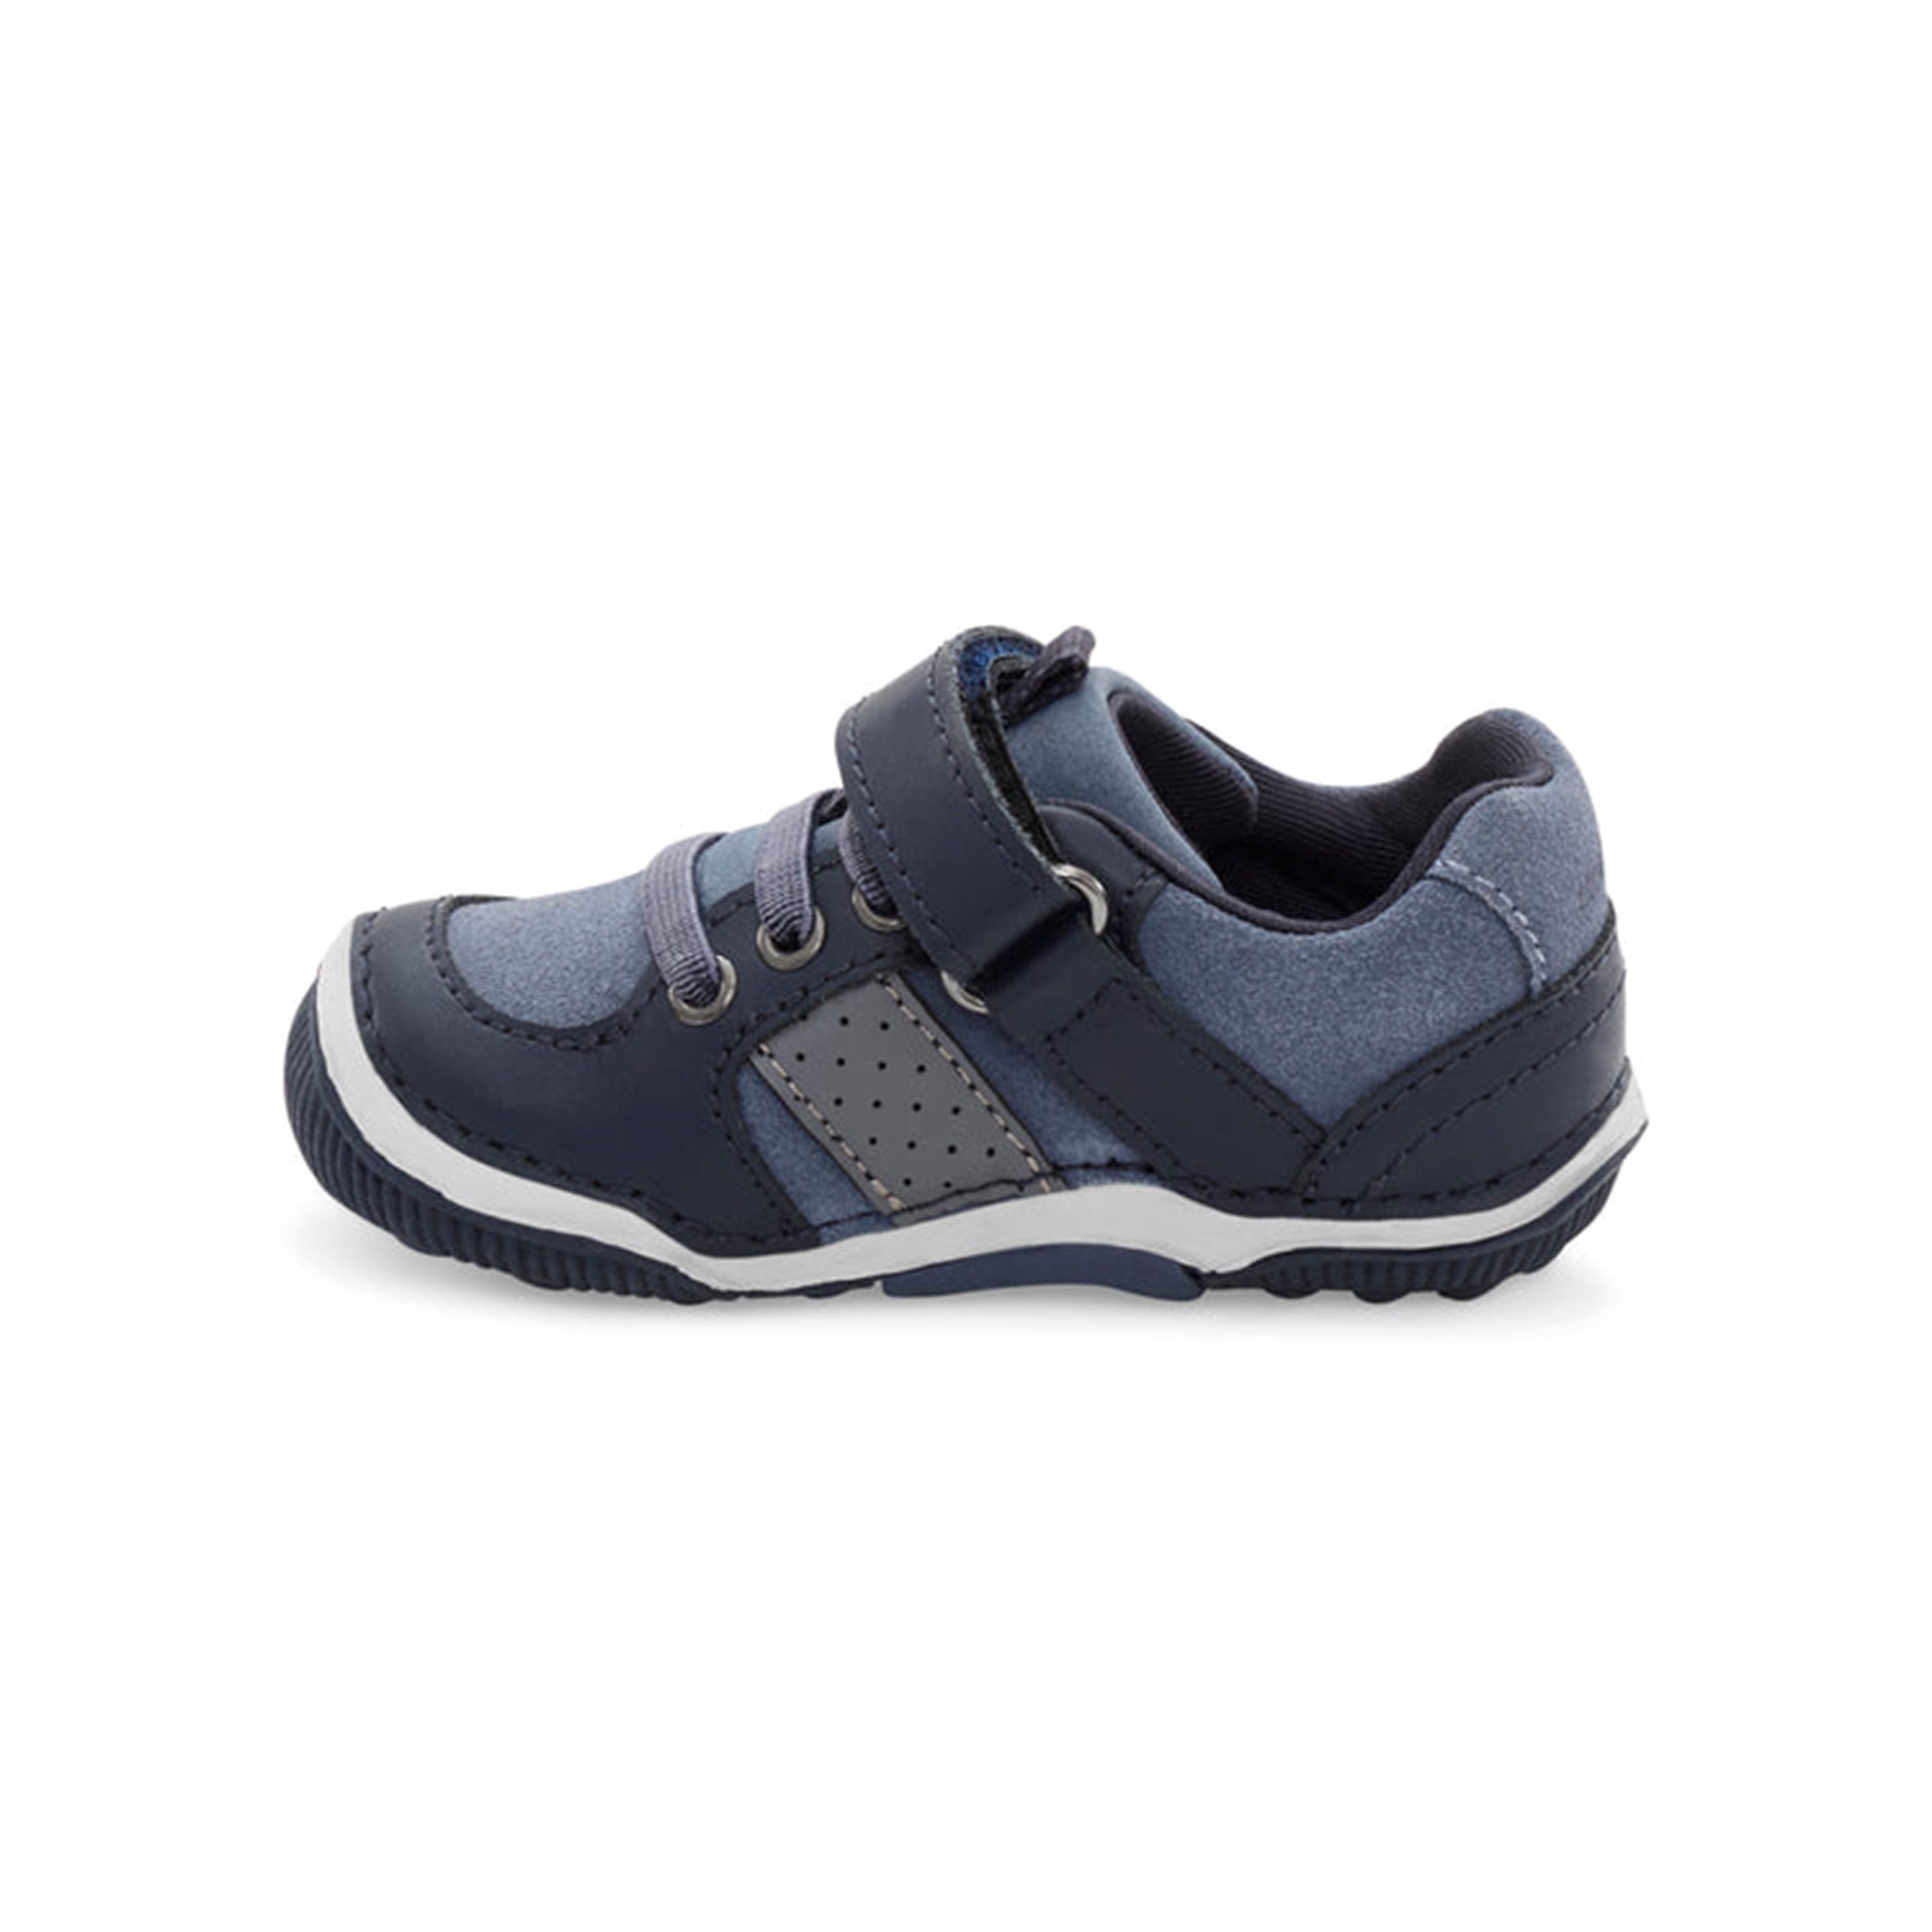 SRTech Wes Kid's Leather Sneaker - Navy